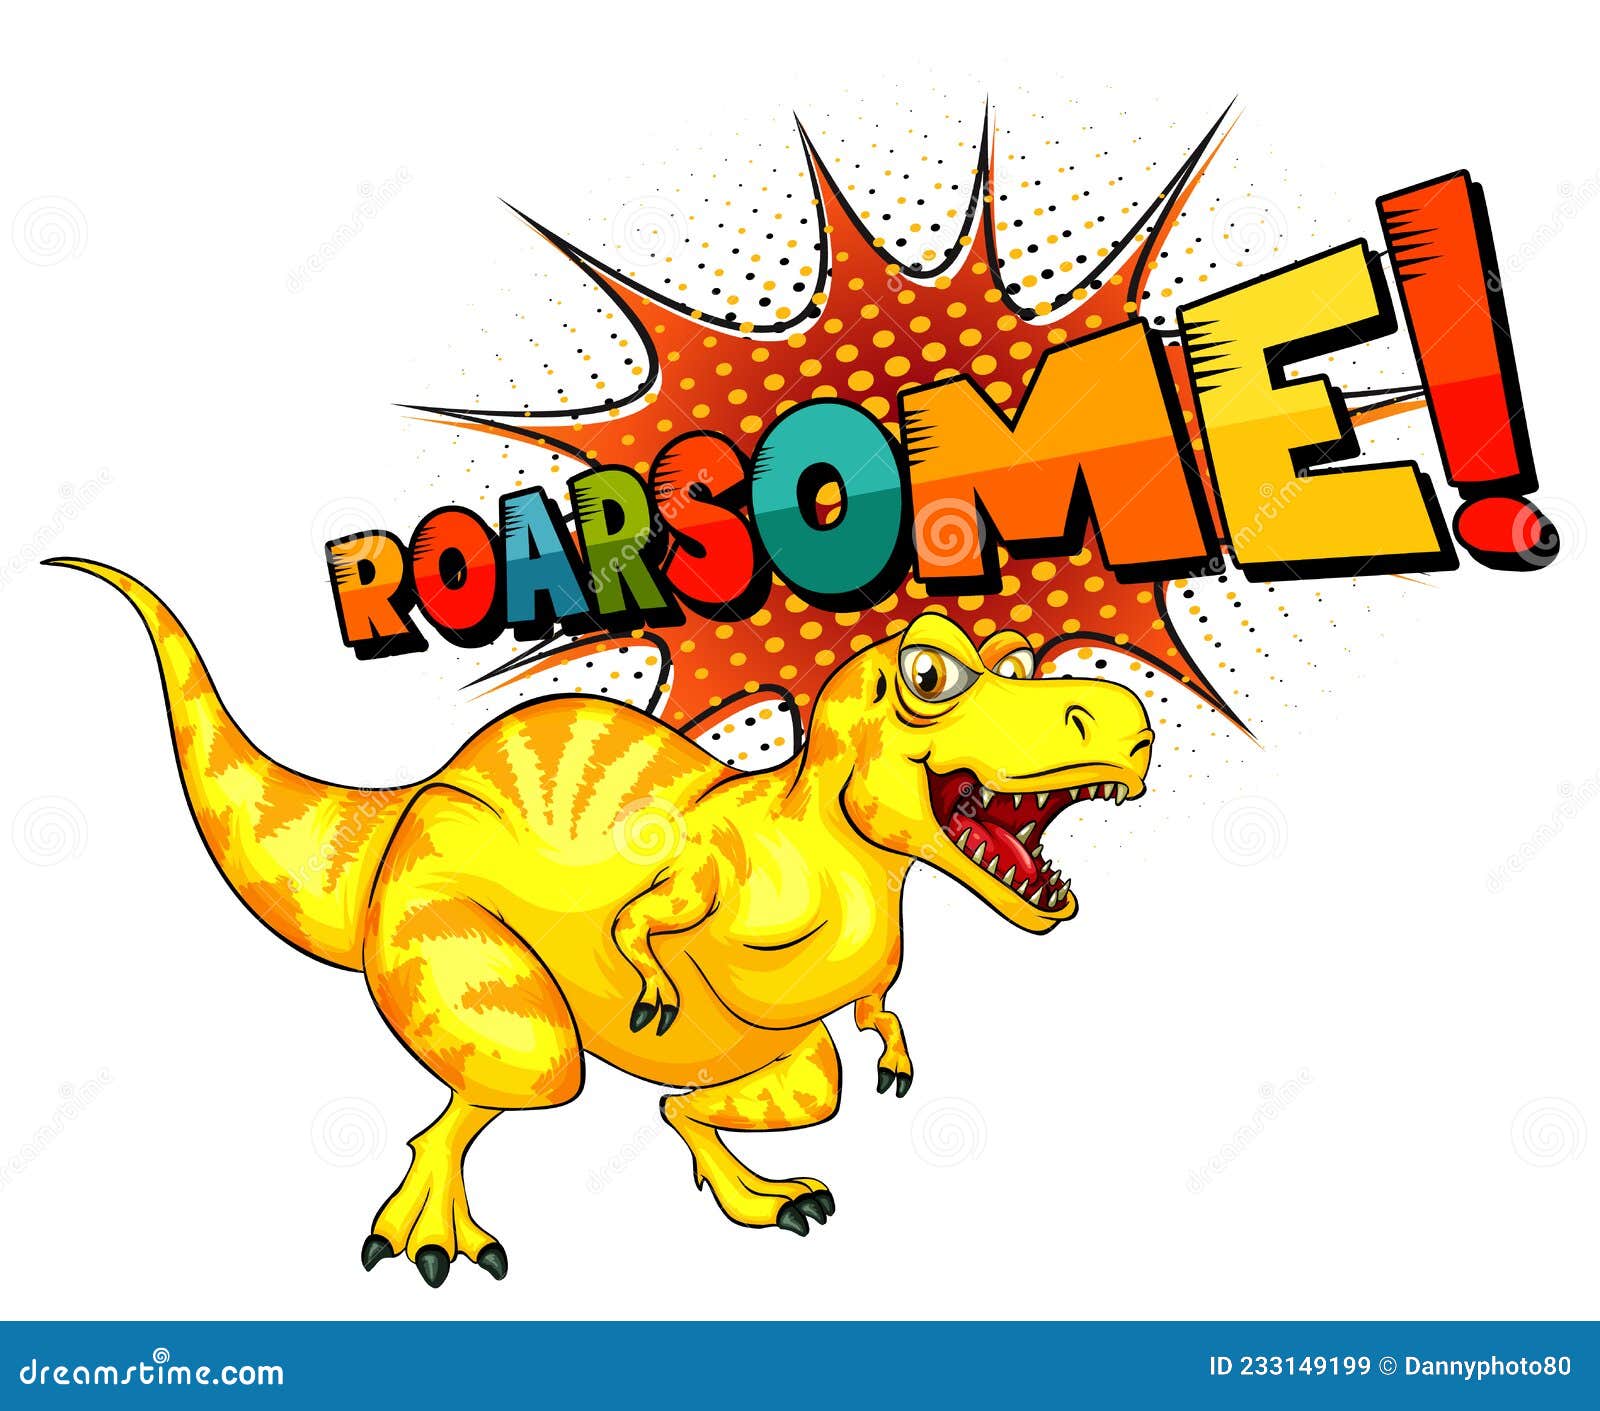 Dinosaur Cartoon Character With Roar Font Banner Stock Vector Illustration Of Banner Character 233149199